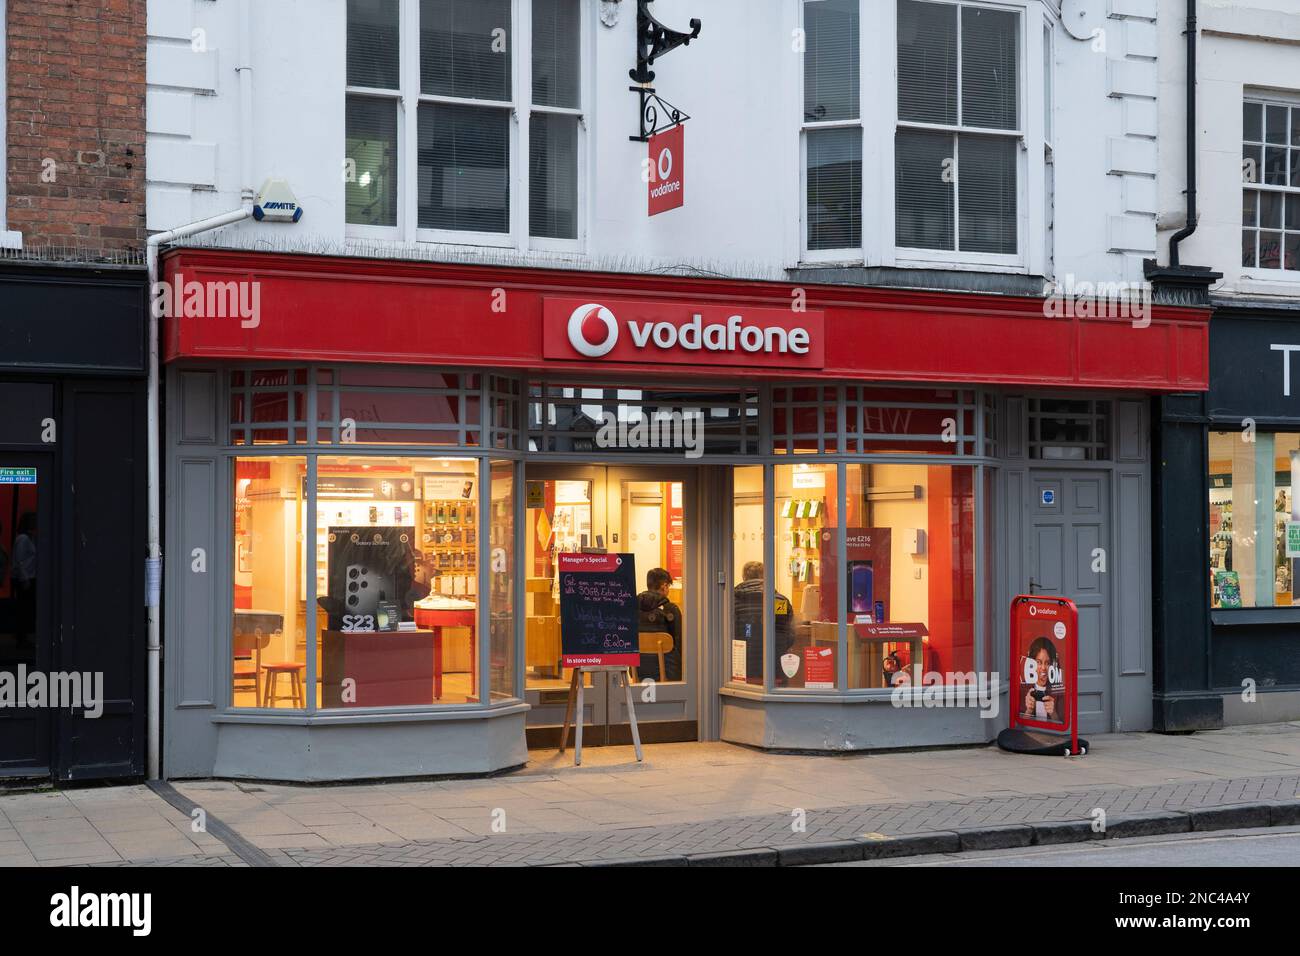 The exterior of a Vodafone store on the High Street in Stratford upon Avon, England. Concept: telecoms industry, telecommunications, mobile broadband Stock Photo